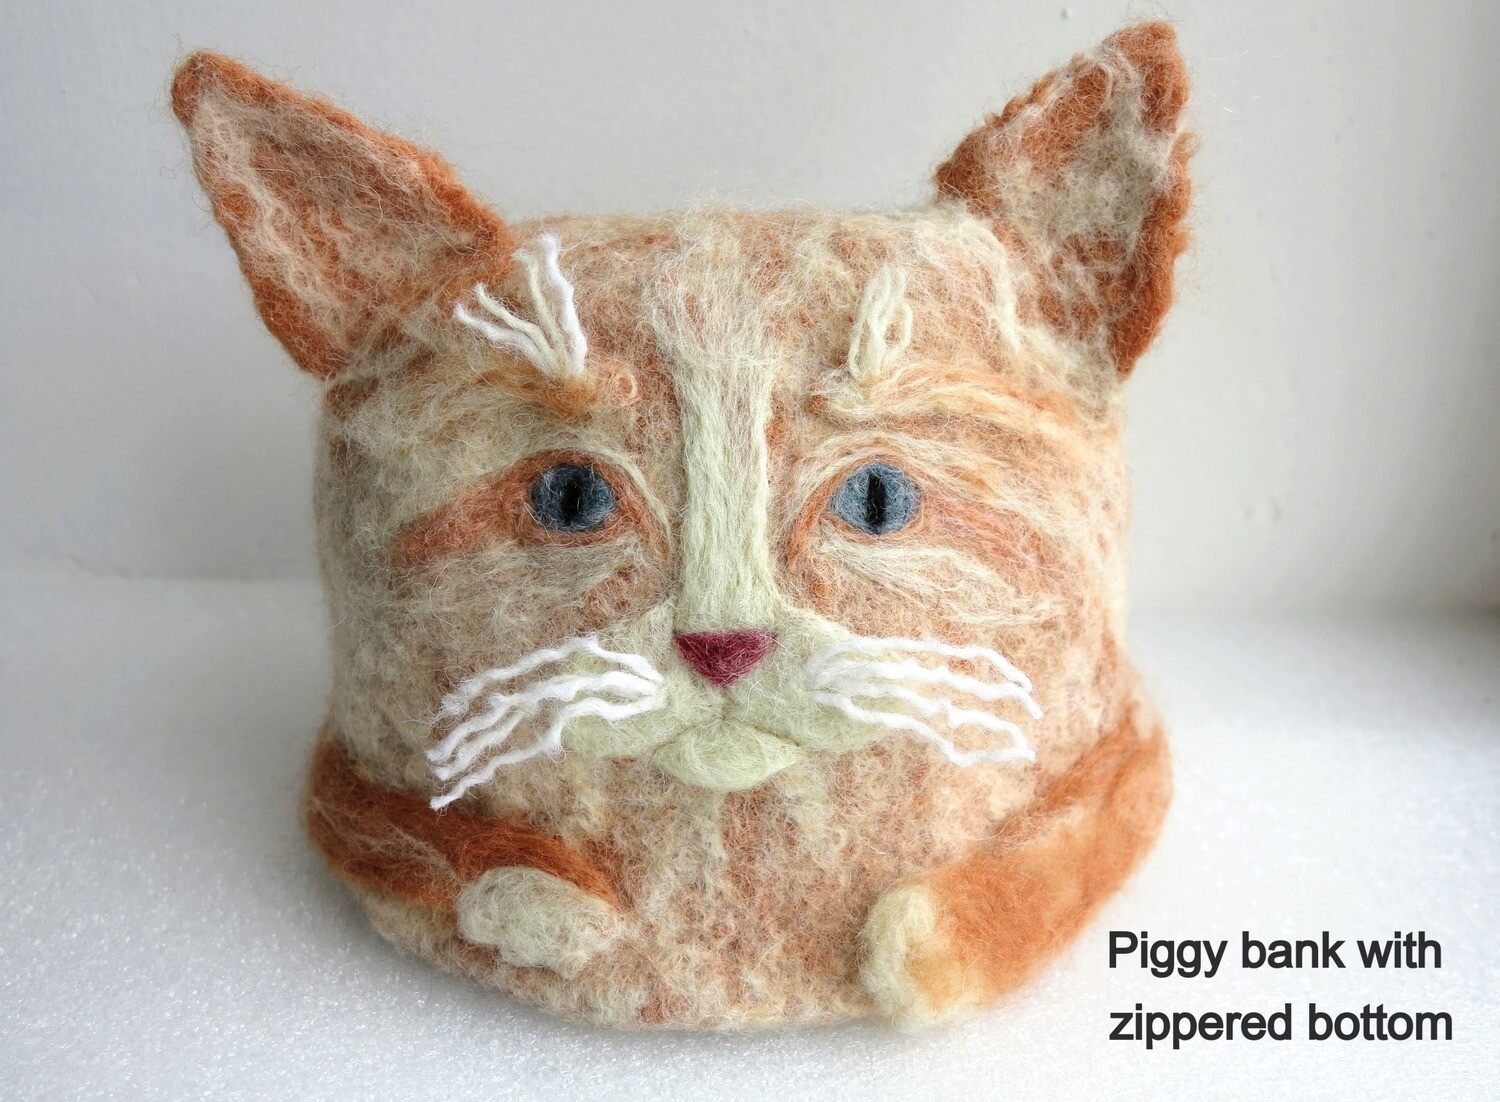 More cats! - Handmade from wool